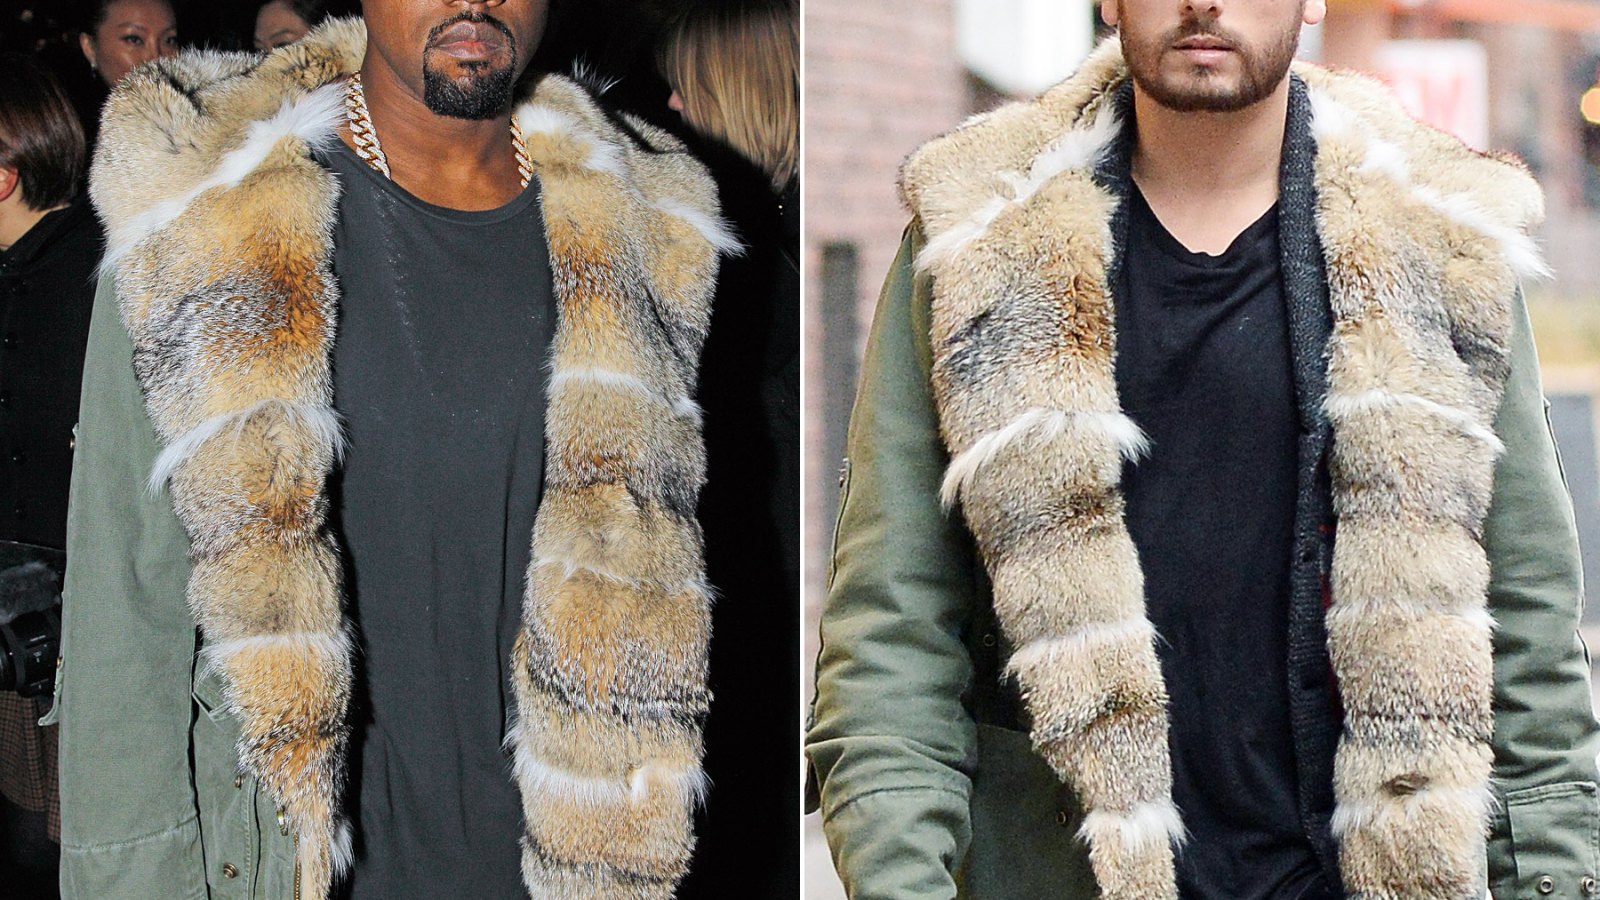 Kanye West and Scott Disick wearing the same jacket